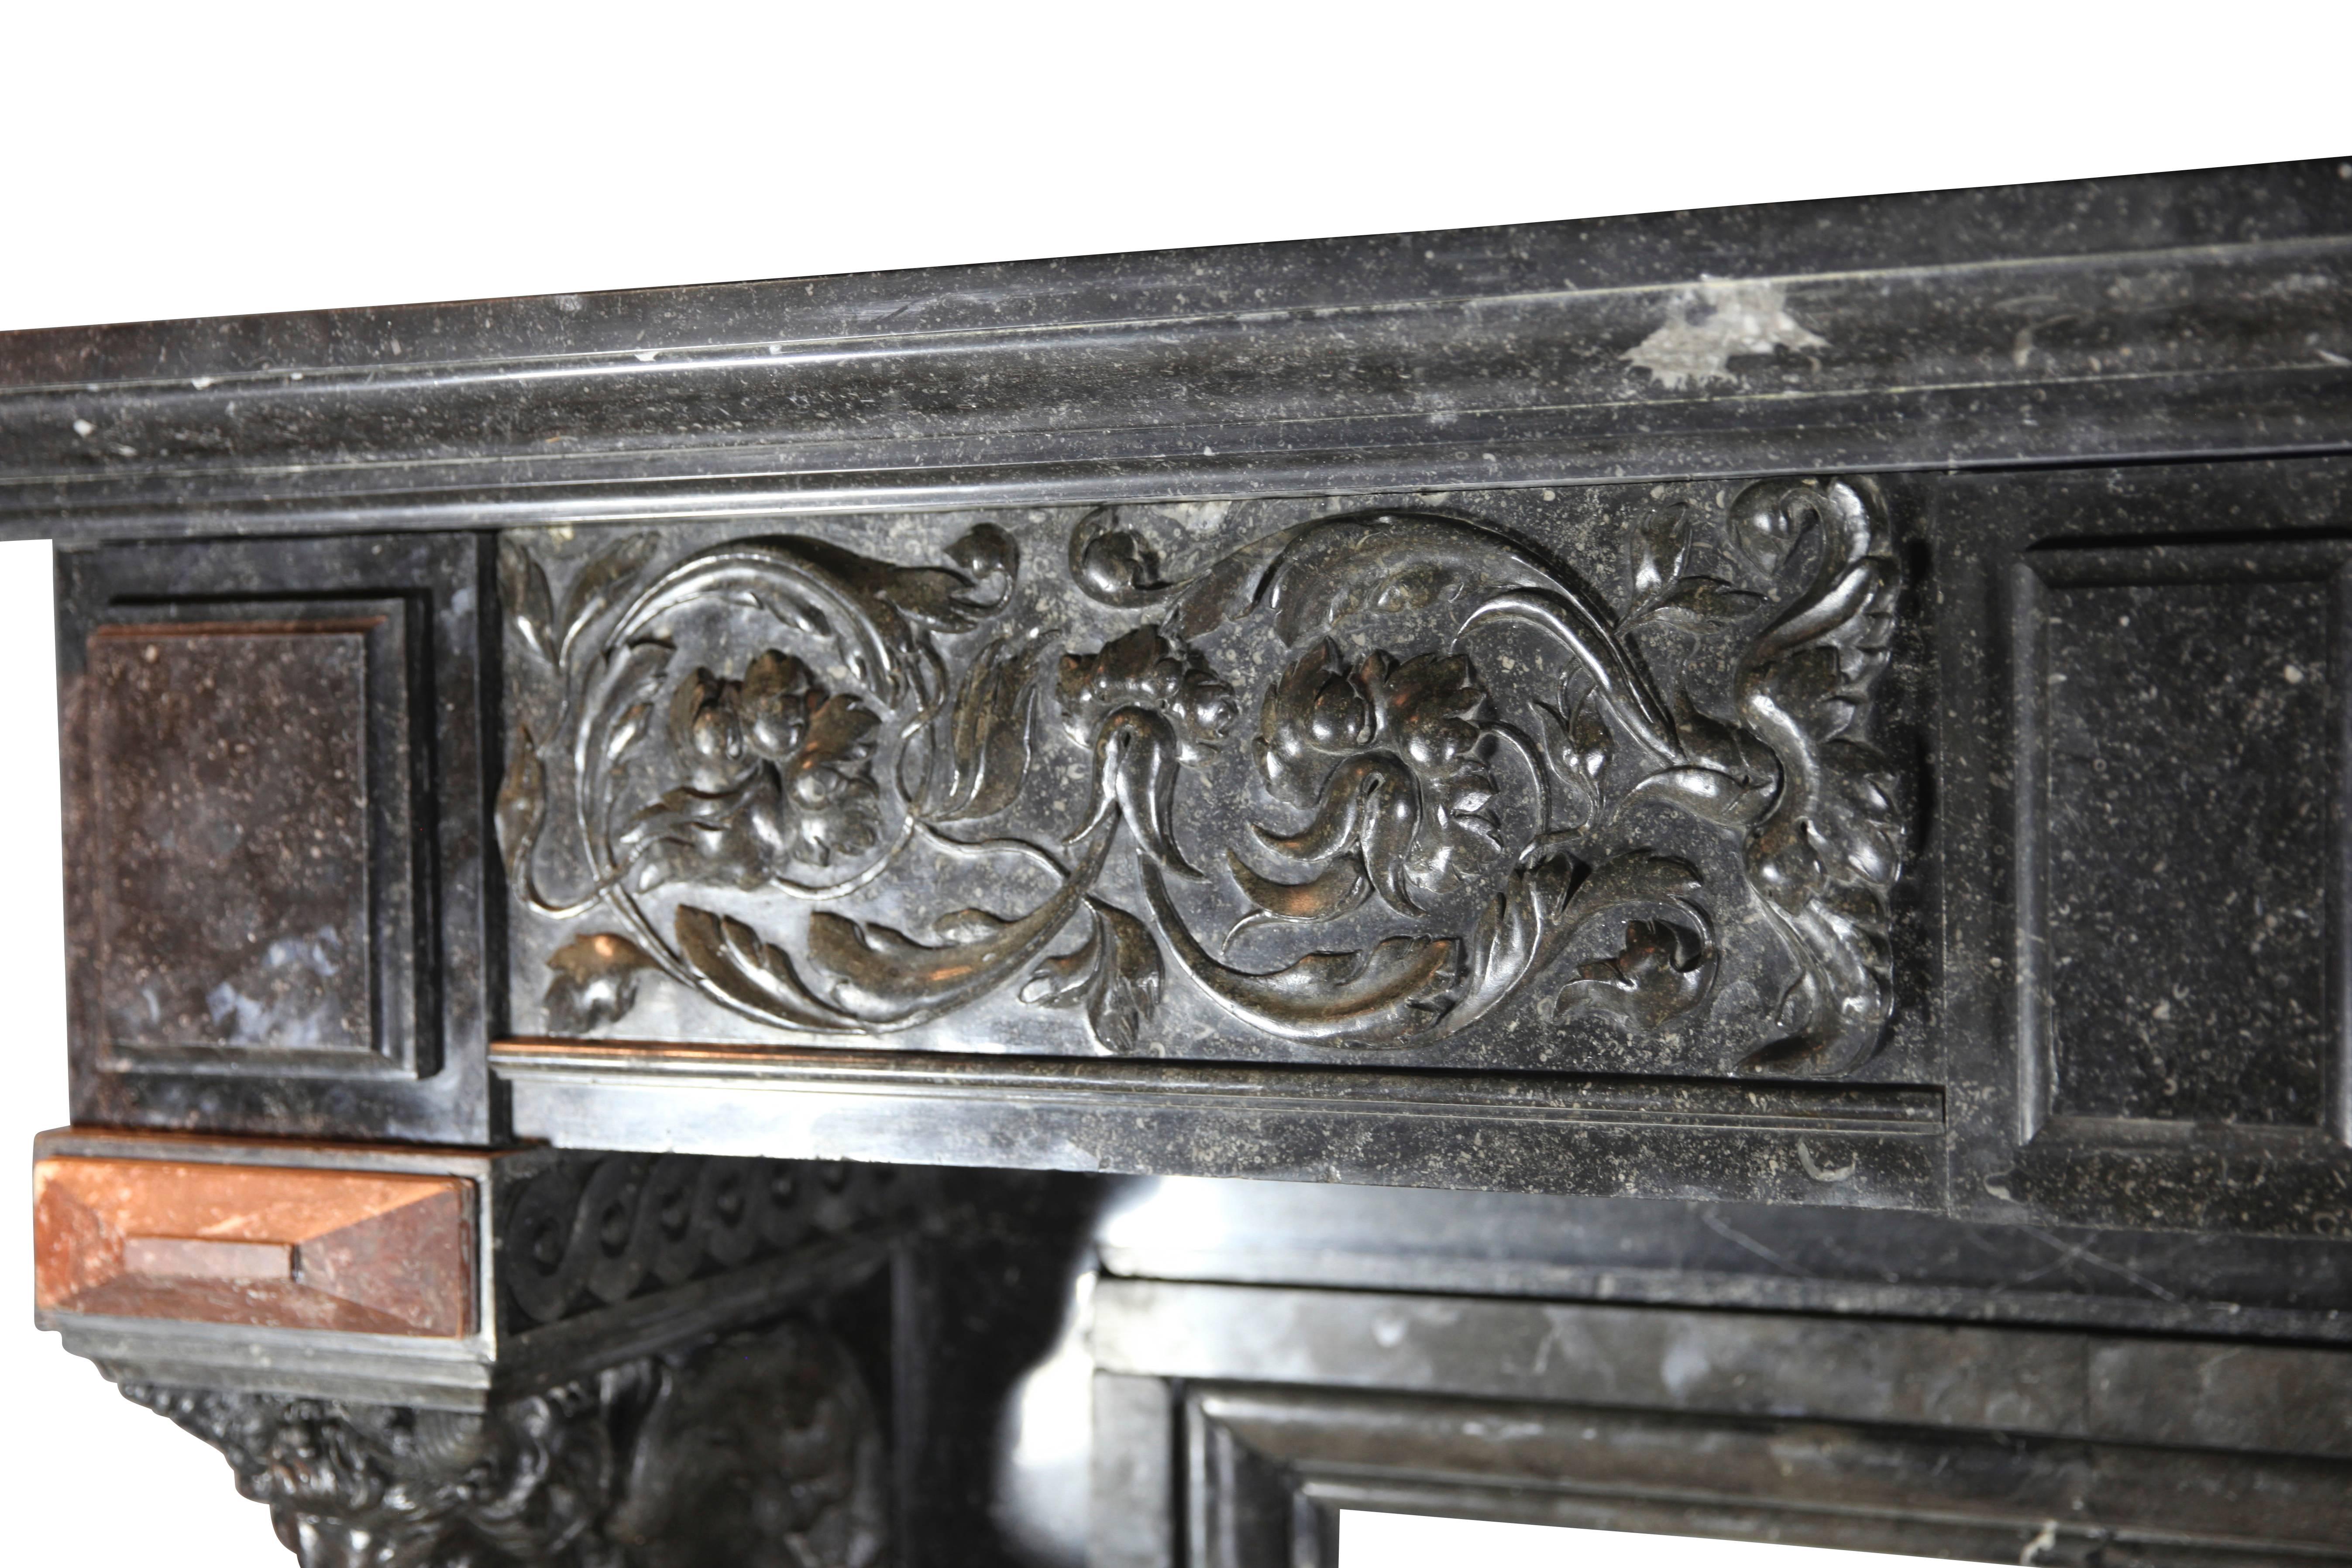 This fireplace surround has been built in Belgian Bleu granite with Rouge de Rochefort marble details. The caricatures are very unique with strong impressions. This is one of a kind piece.
Measures:
178 cm Exterior Width 70. Inch
165 cm Exterior